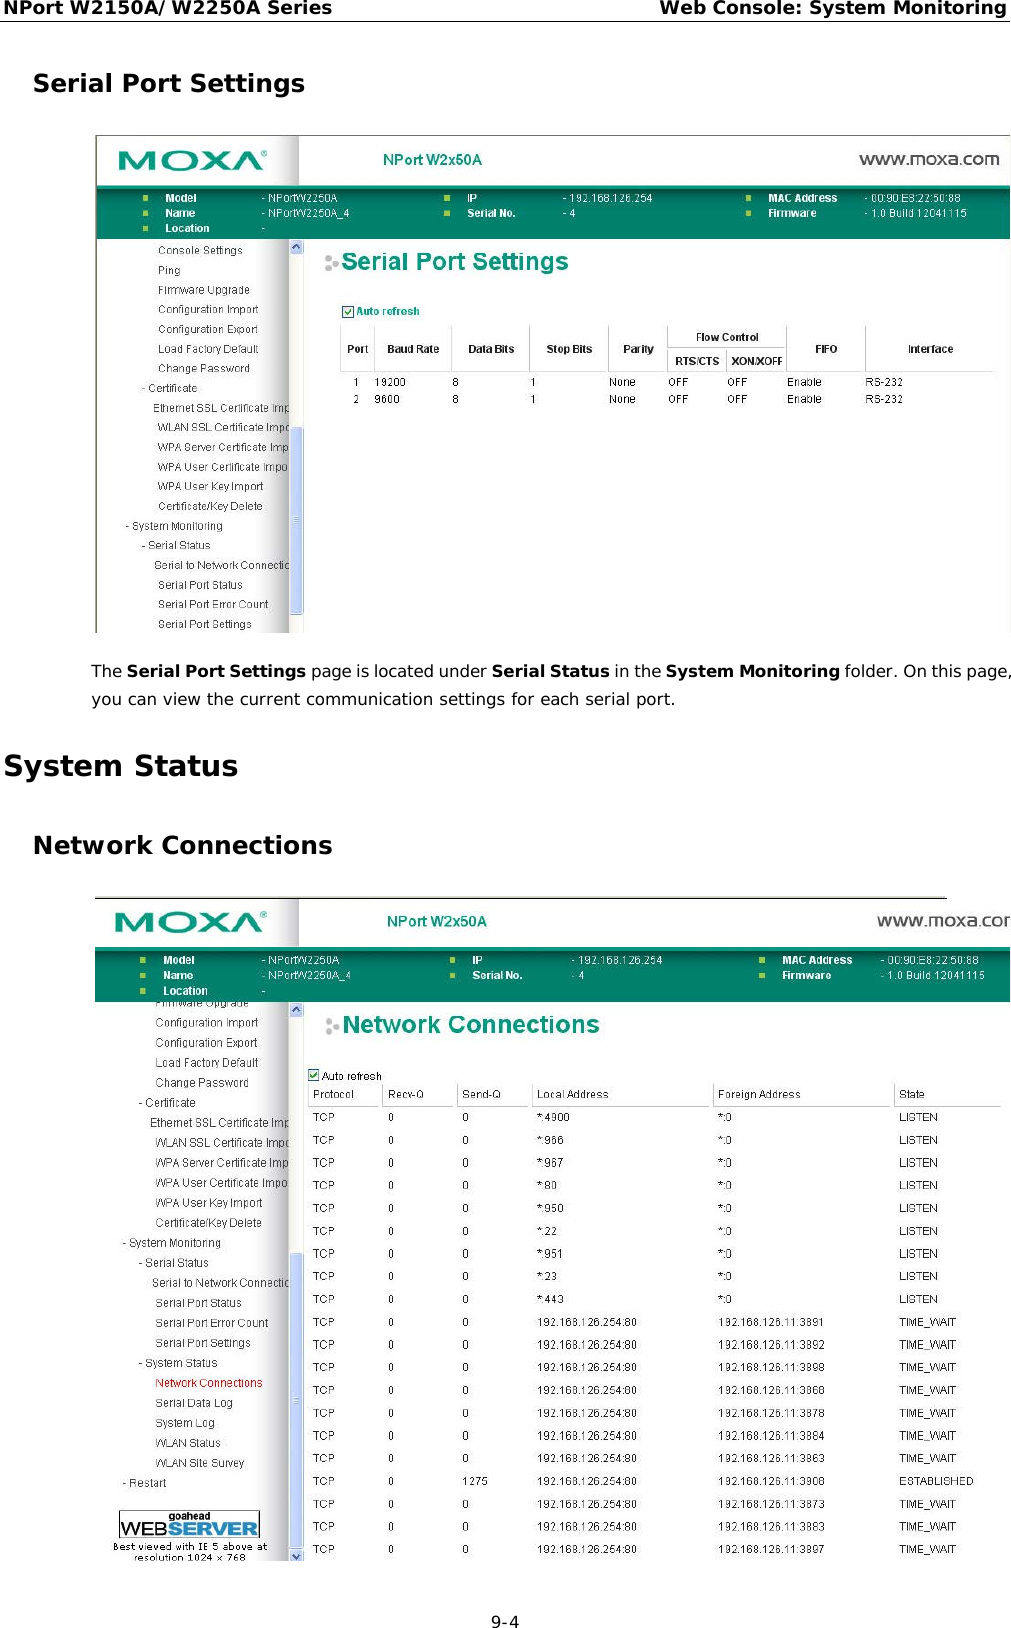 NPort W2150A/W2250A Series Web Console: System Monitoring  9-4 Serial Port Settings  The Serial Port Settings page is located under Serial Status in the System Monitoring folder. On this page, you can view the current communication settings for each serial port. System Status Network Connections  